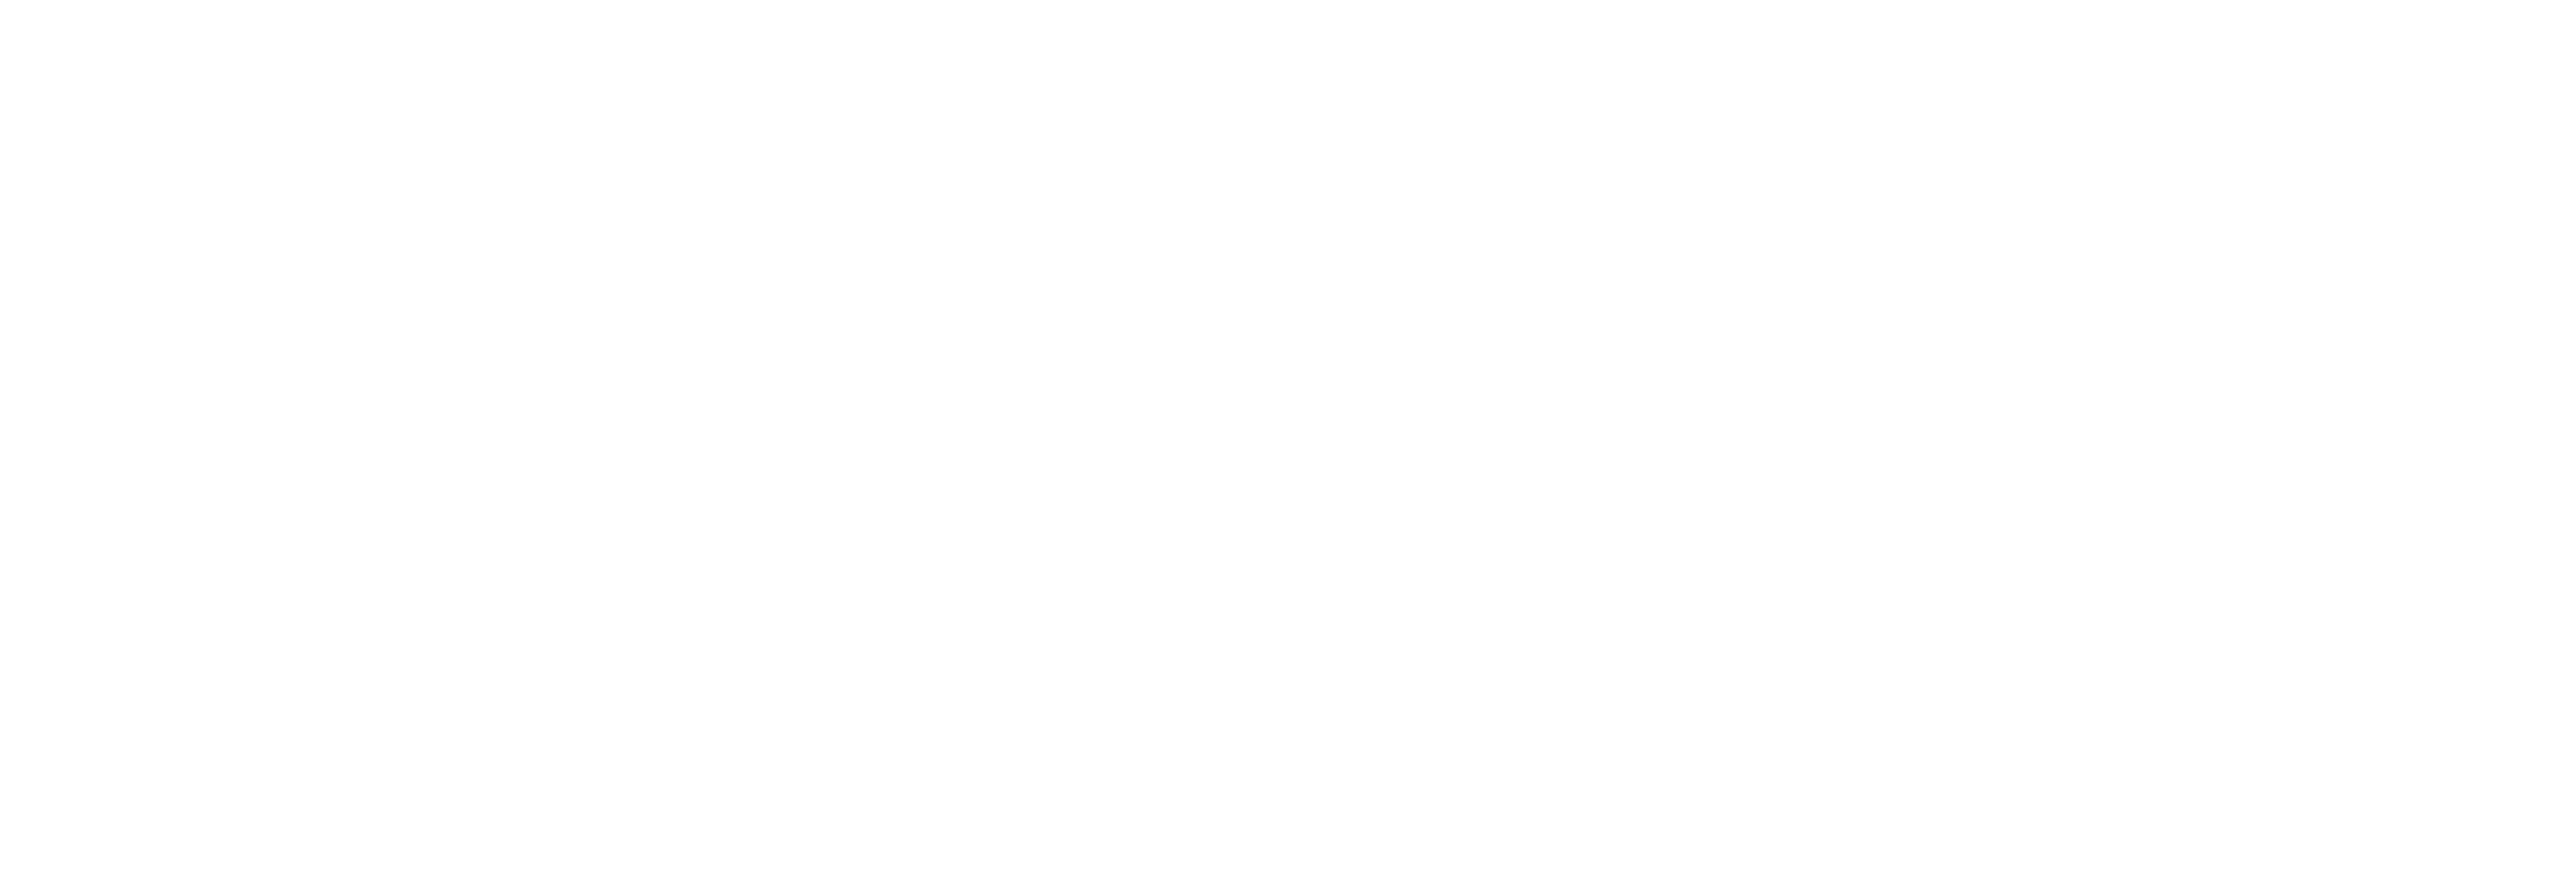 Red Dead Redemption 2 логотип PNG